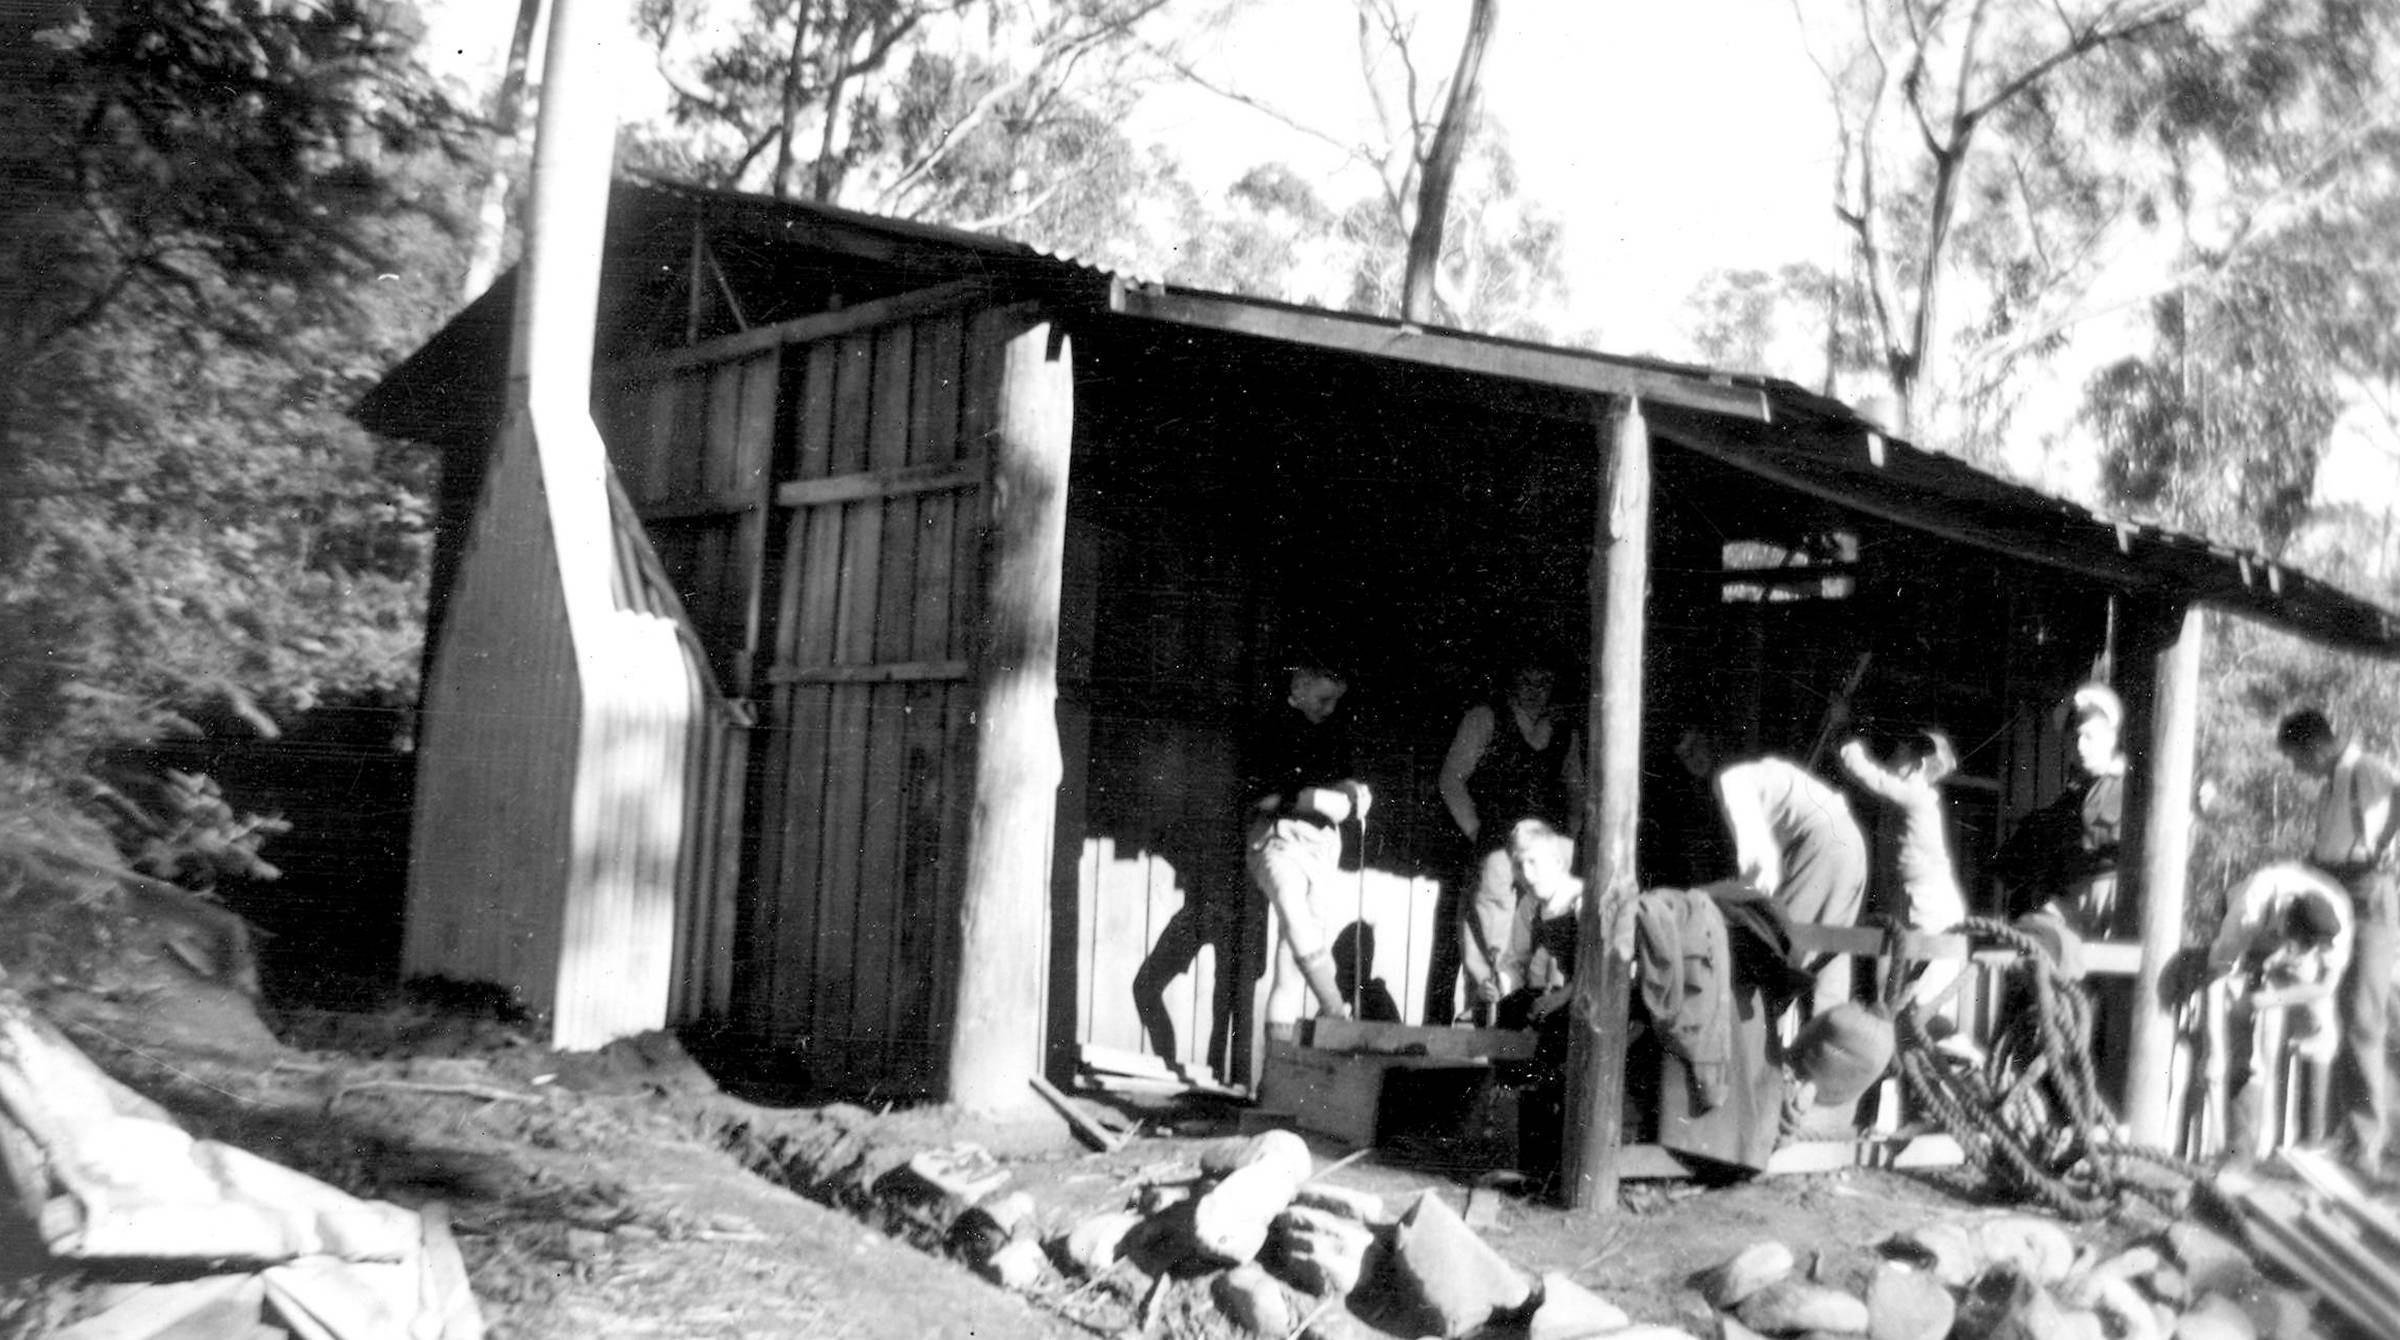 Opening of the Chauncy Vale hut built by Hutchins students, 1947